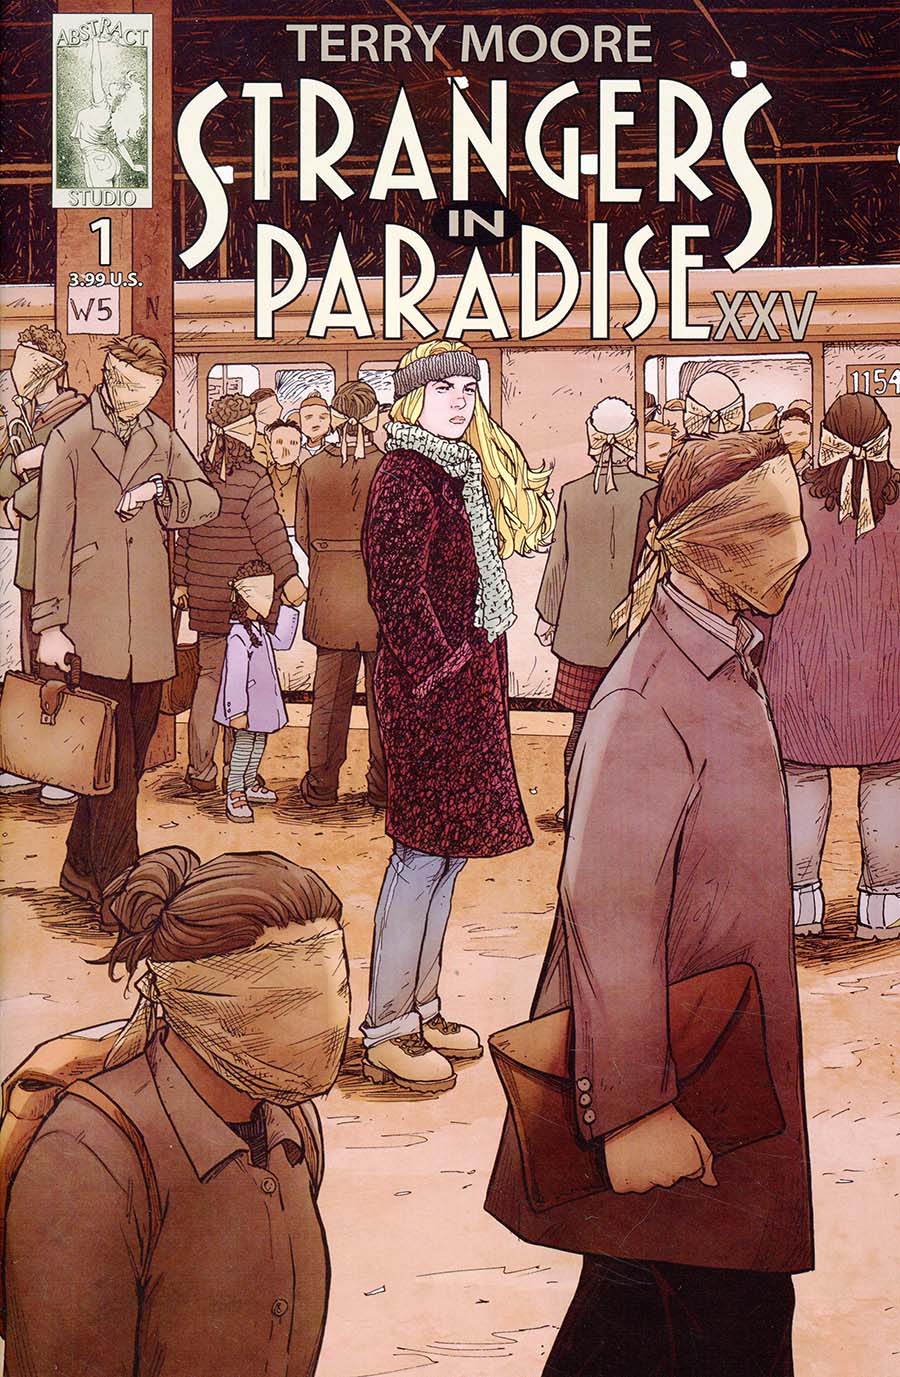 Strangers In Paradise XXV #1 Cover A Regular Terry Moore Cover